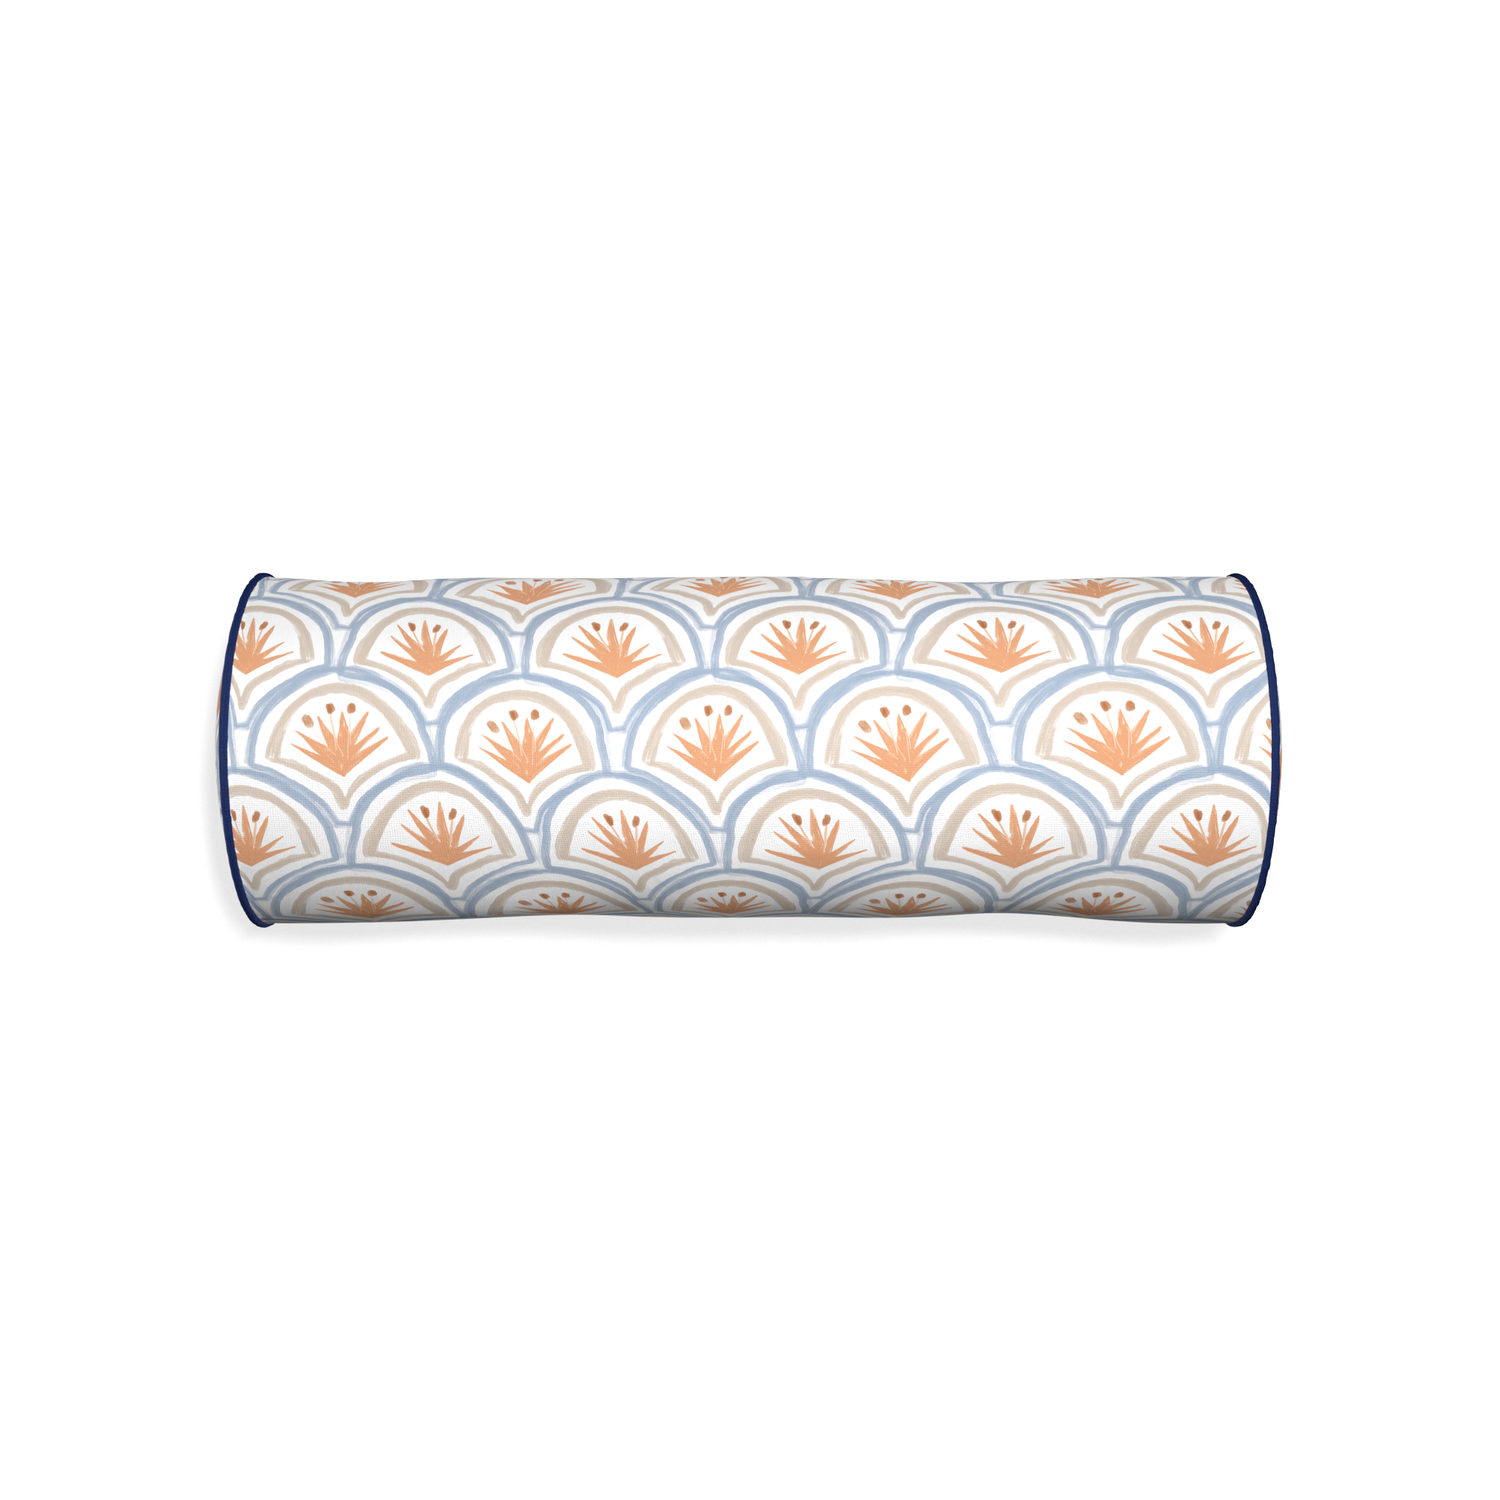 Bolster thatcher apricot custom pillow with midnight piping on white background